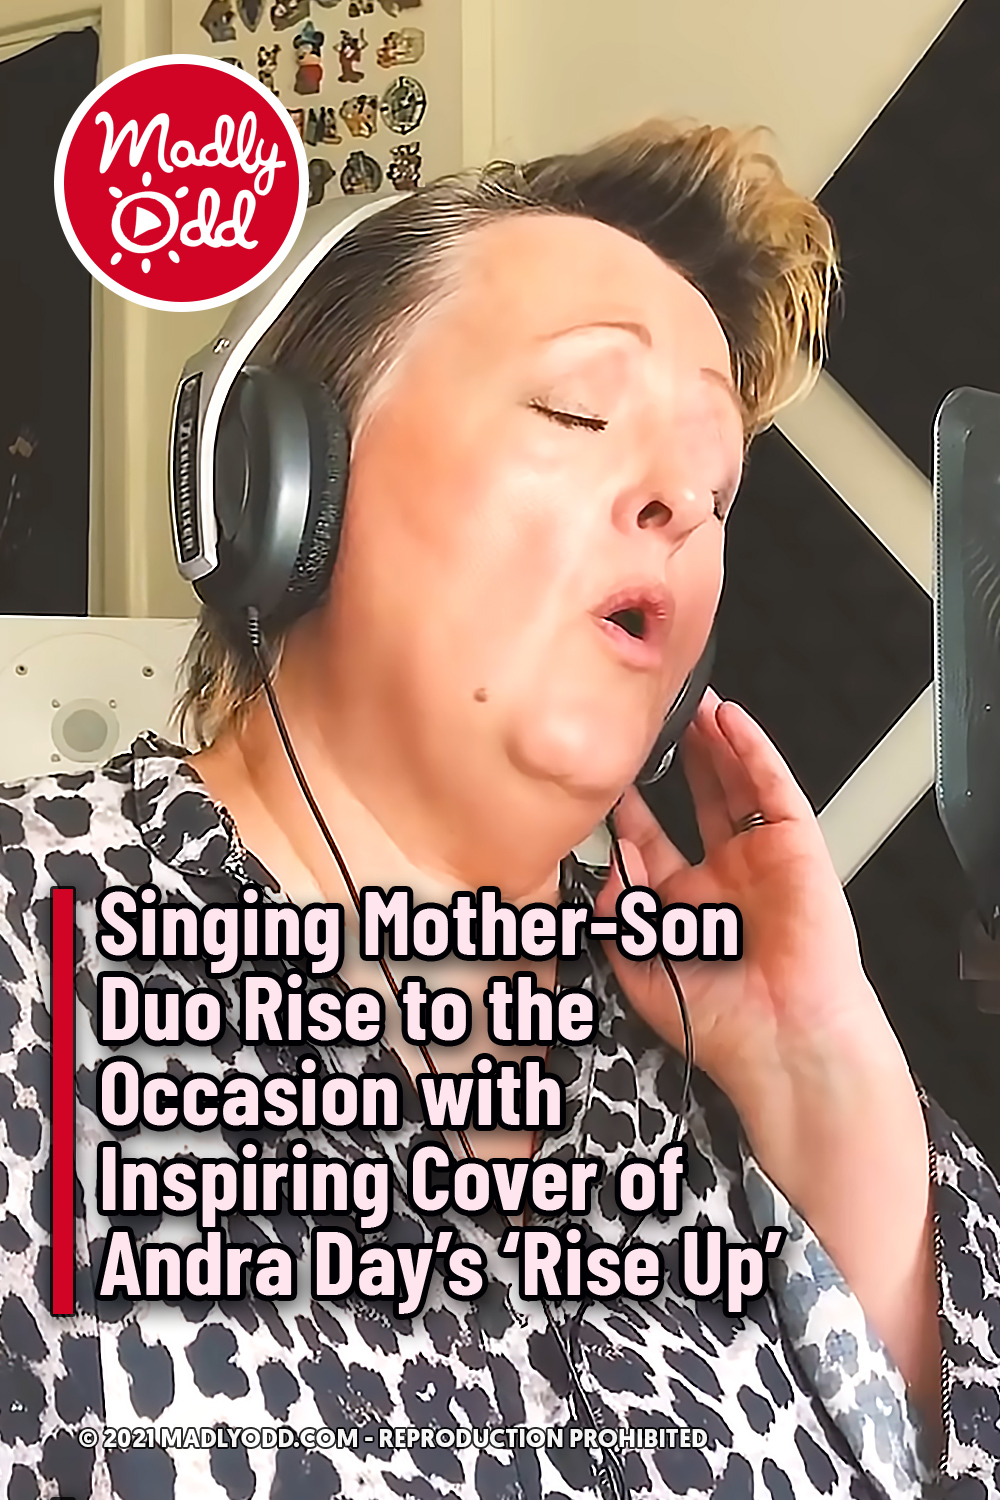 Singing Mother-Son Duo Rise to the Occasion with Inspiring Cover of Andra Day’s ‘Rise Up’